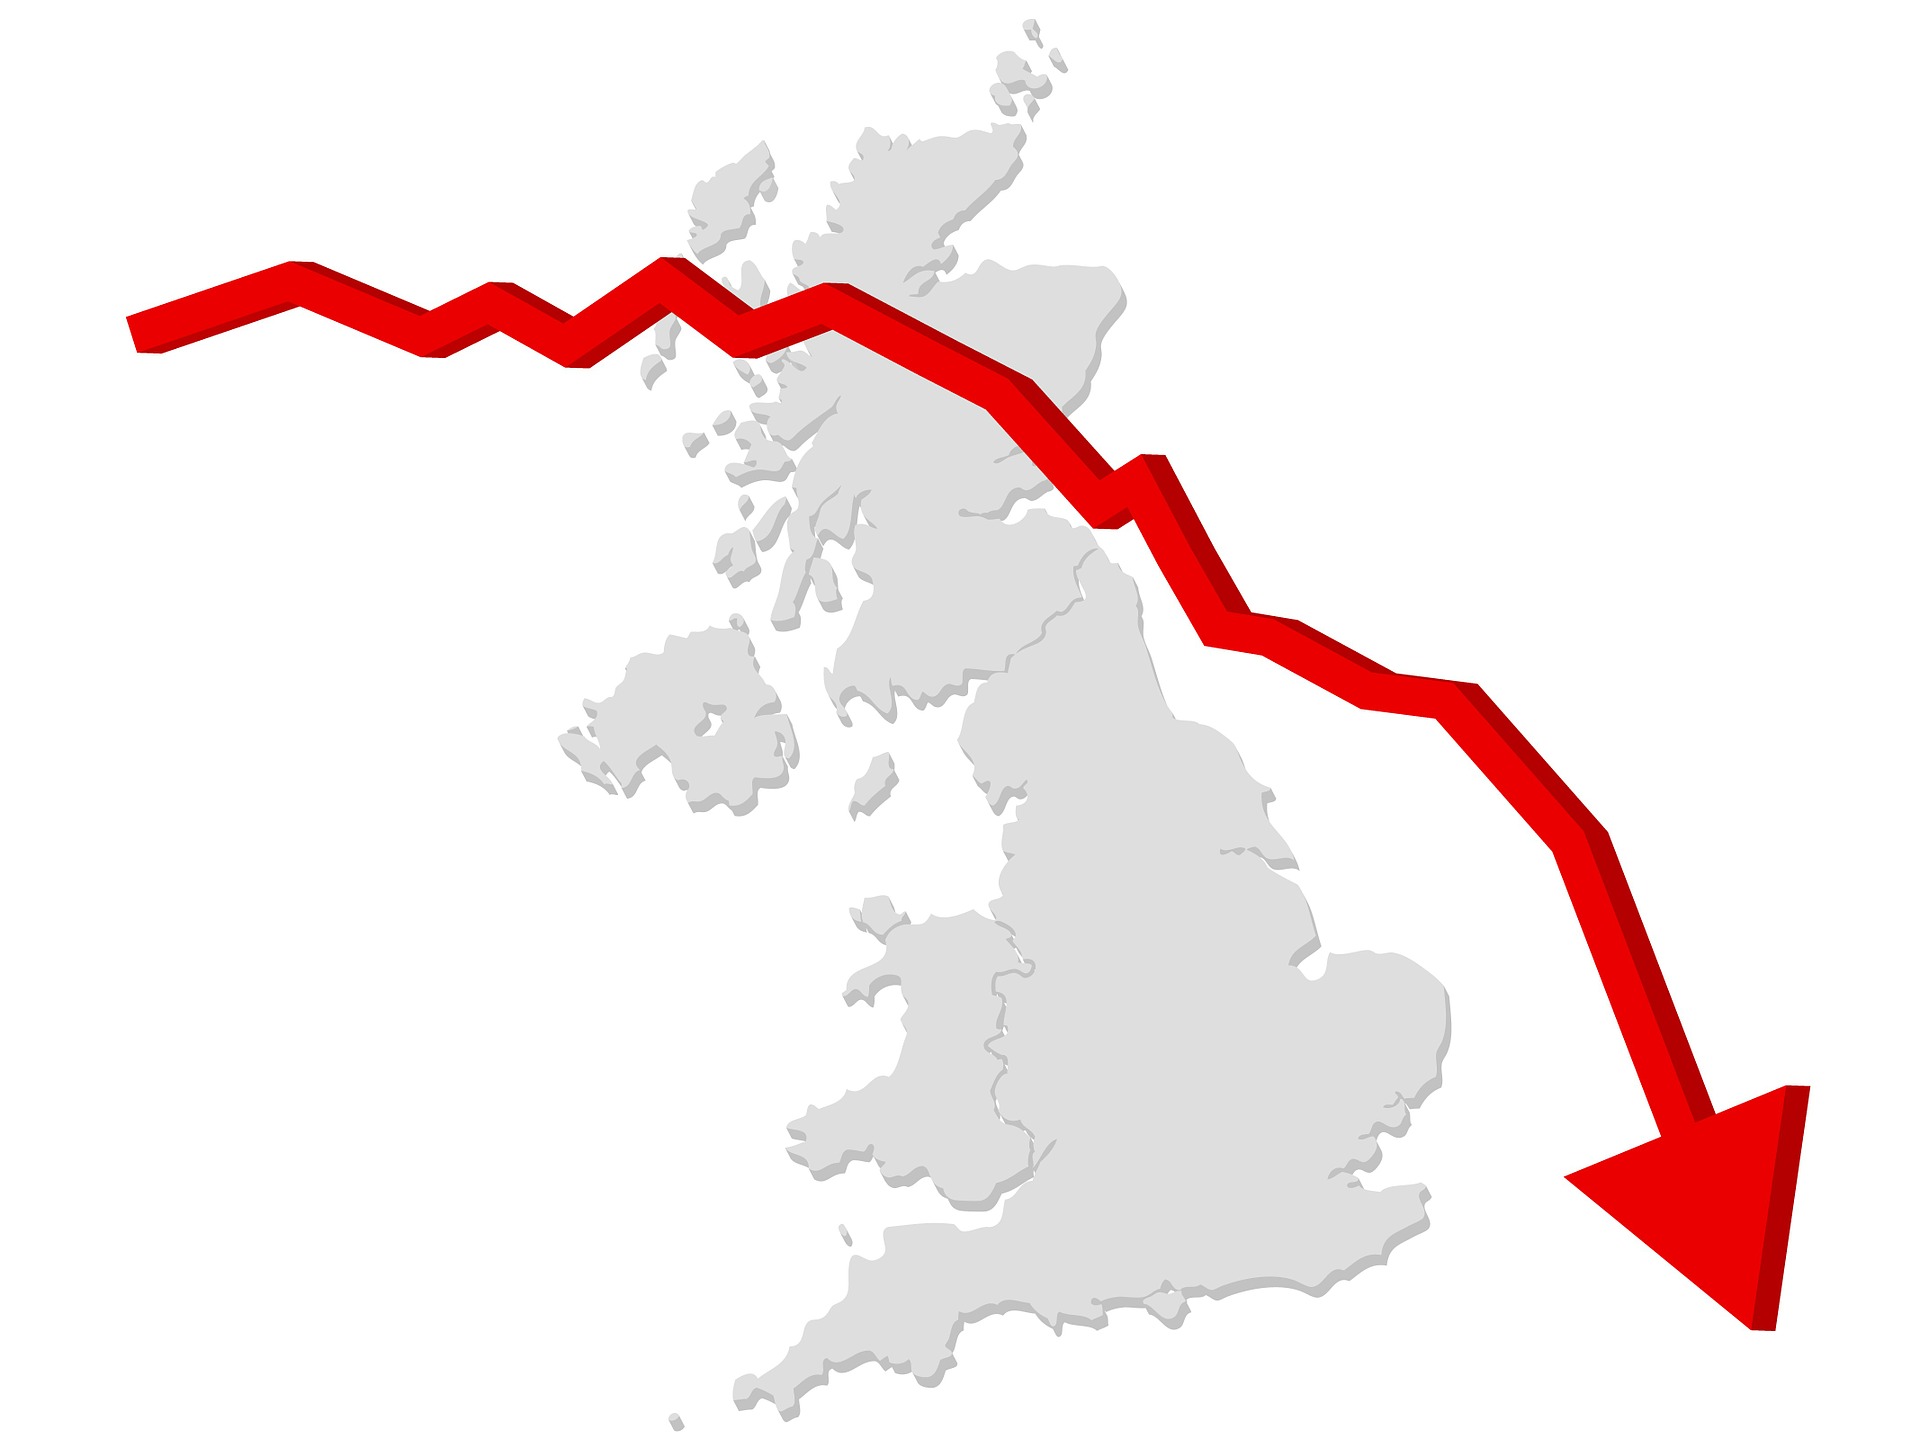 uk-house-prices-predicted-to-drop-by-at-least-10%